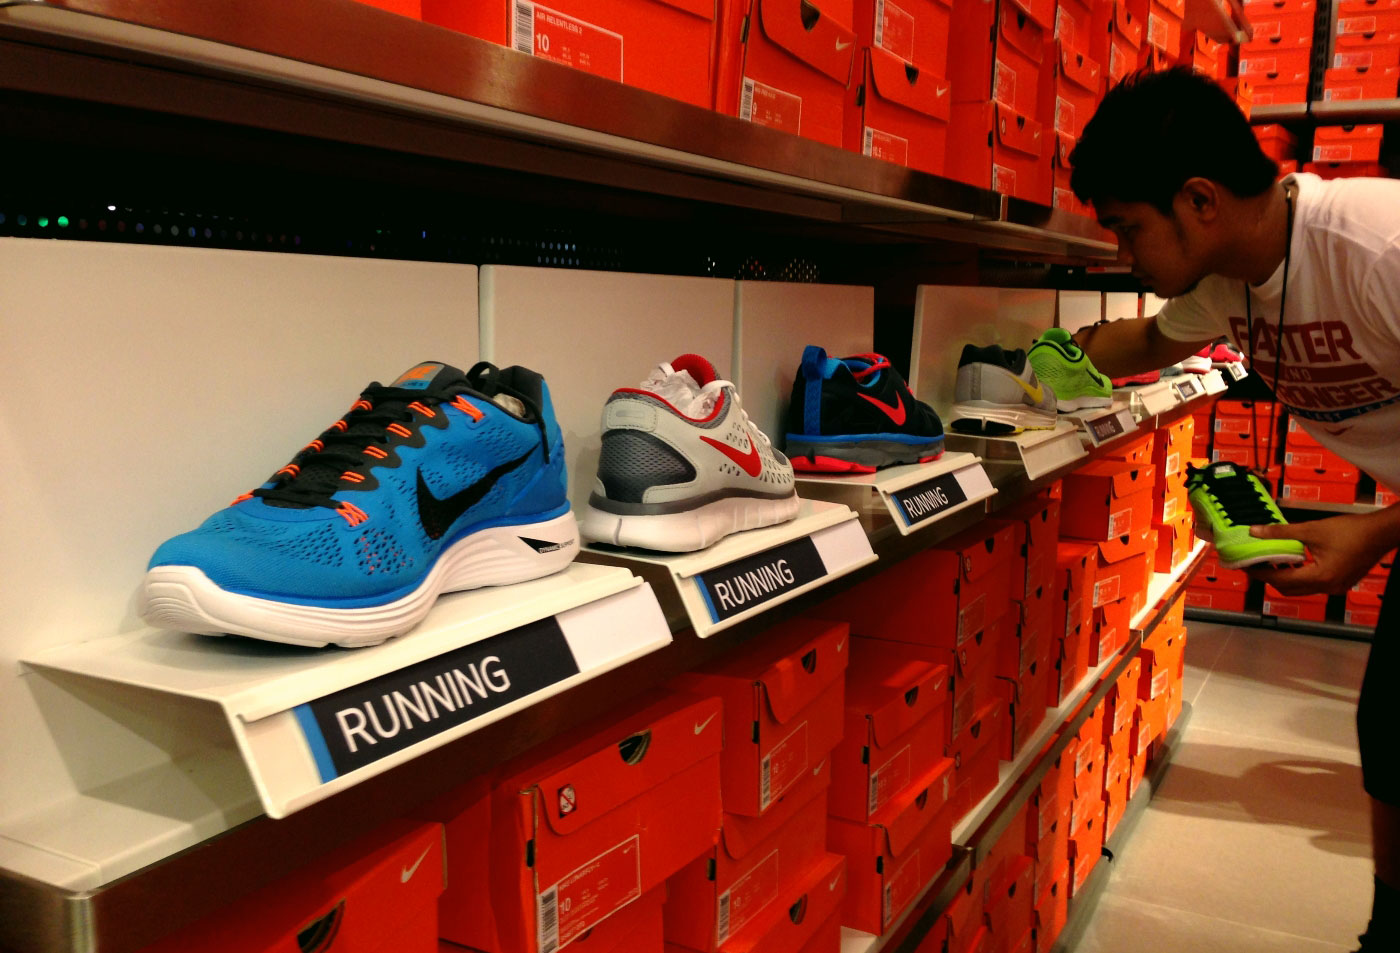 Shoes for running, basketball, tennis, football and other athletic gear are available for big discounts at the Nike Factory Shop in The Outlets at Pueblo Verde. Other athletic shops in the area include those of Adidas and G-Force (which sells Reef and Oakley products). (Photo by Max Limpag)